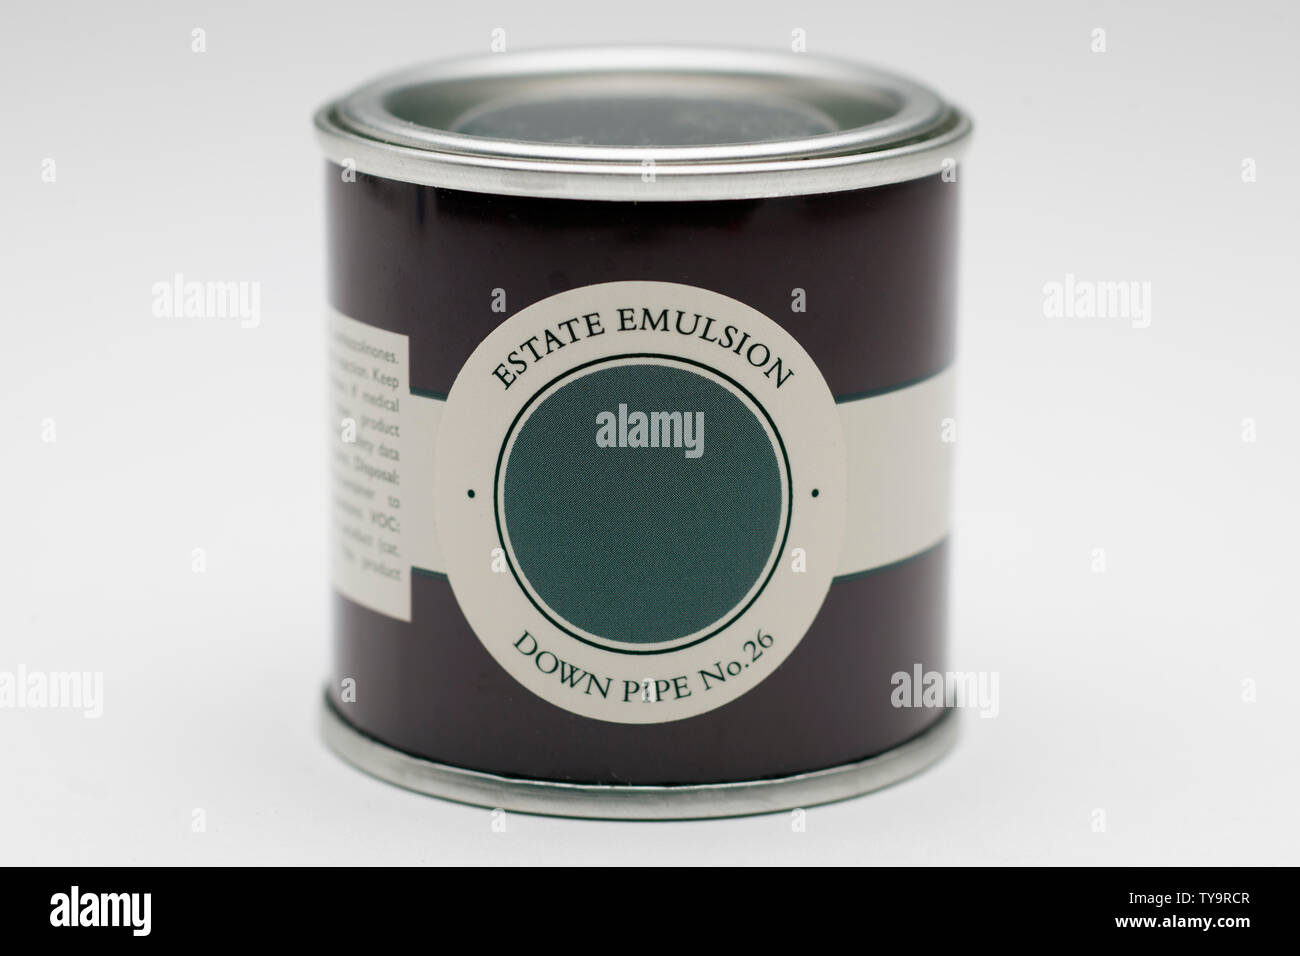 Farrow and Ball can of estate emulsion Down Pipe no 26 test pot Stock Photo